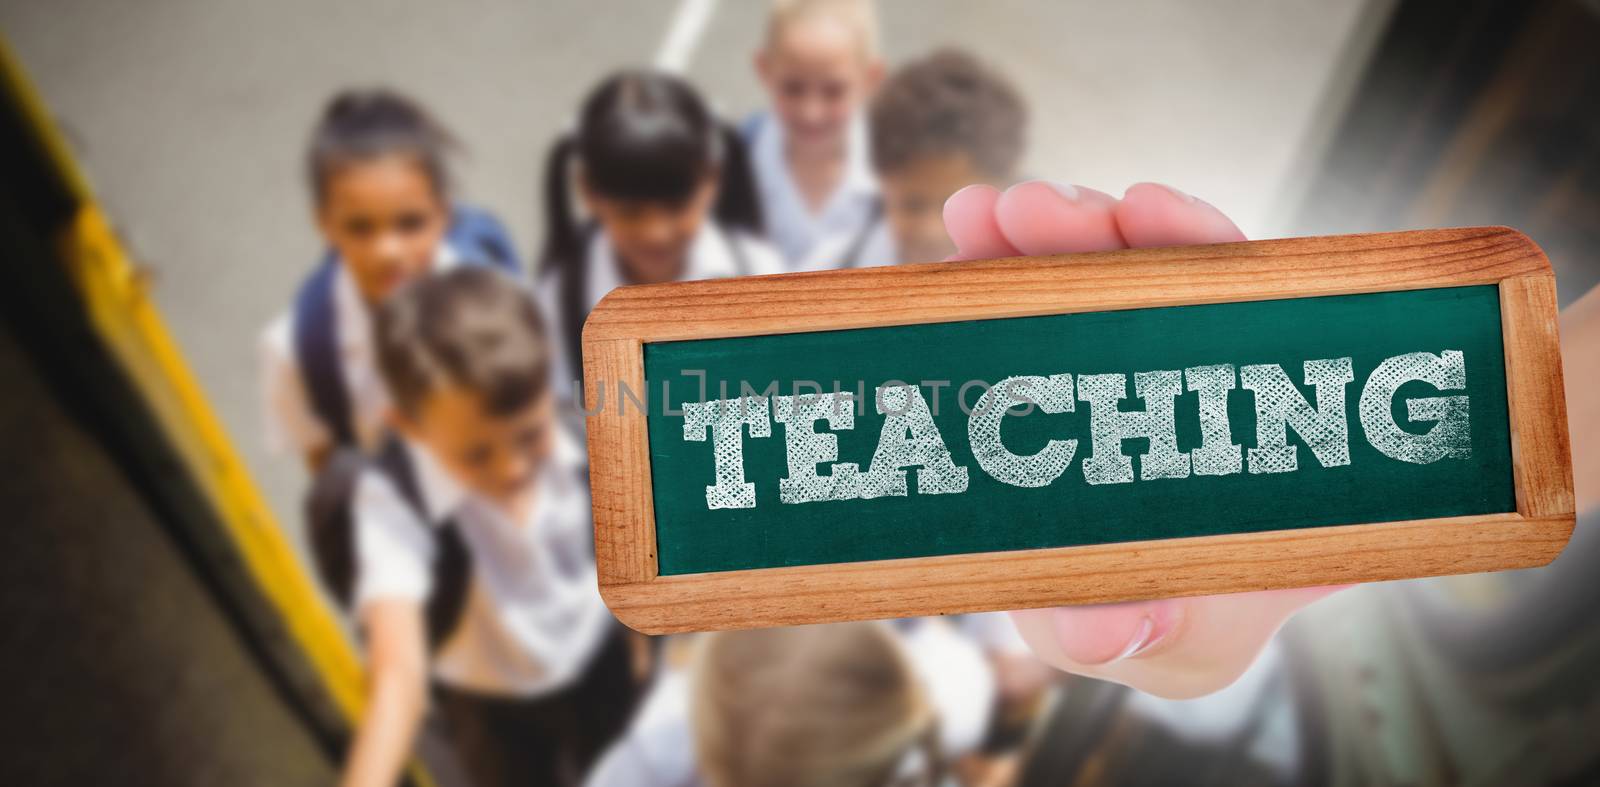 The word teaching and hand showing chalkboard against cute schoolchildren getting on school bus